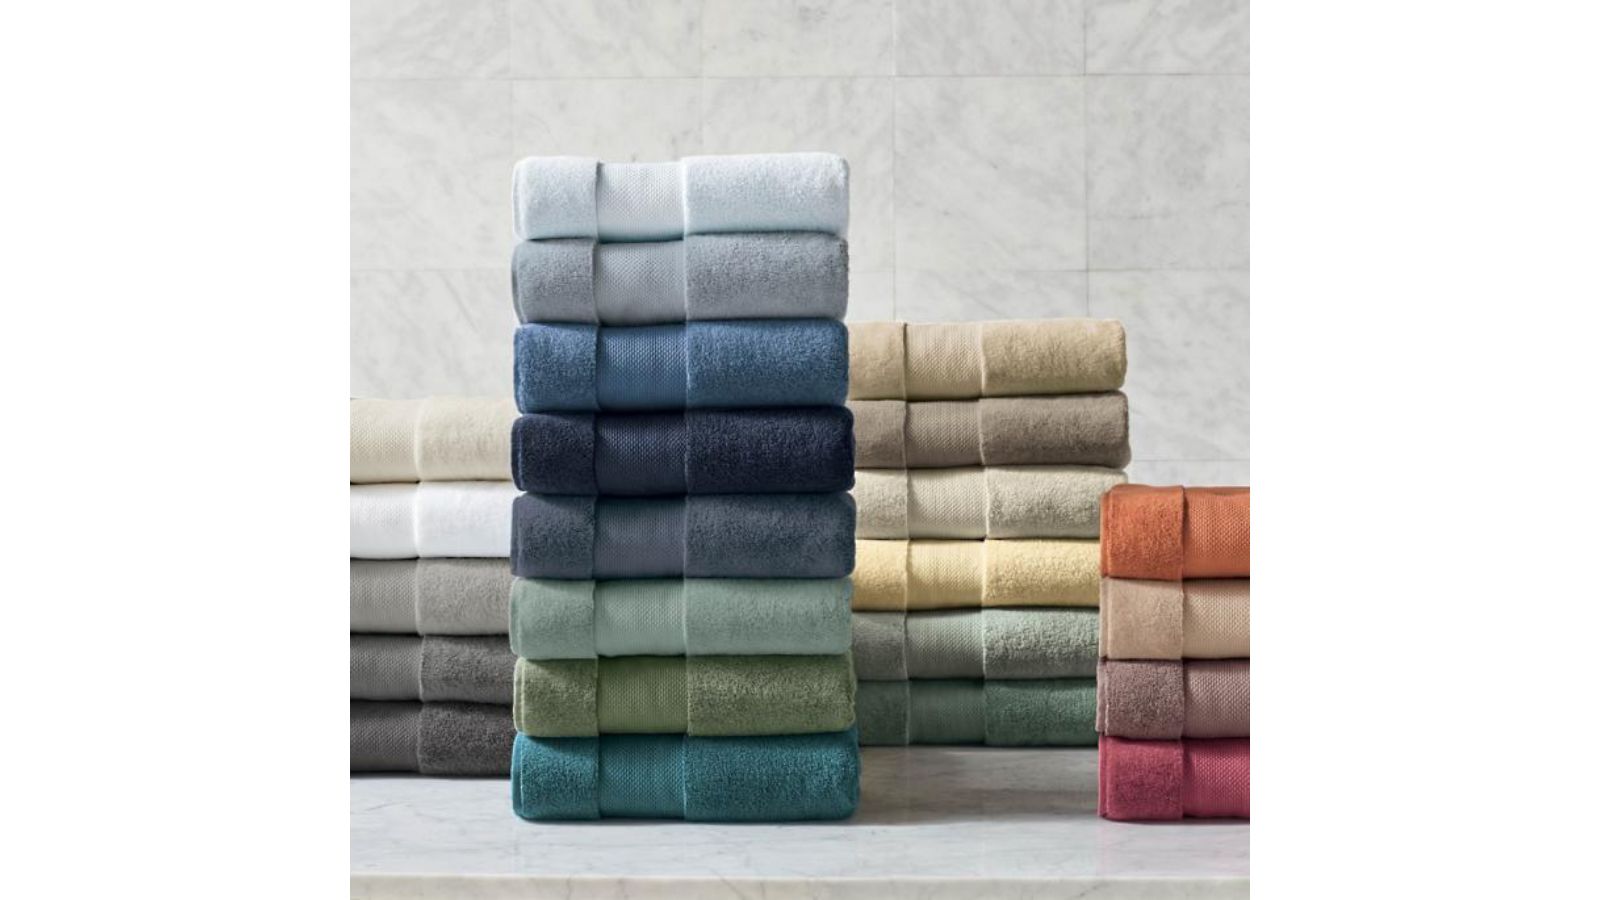 Frontgate Outlet - New Resort Towels added to the Frontgate Essential Shop!  Terracotta, Green Clay, and Indigo are now available in store 10% off  everyday! #FrontgateOutletGA